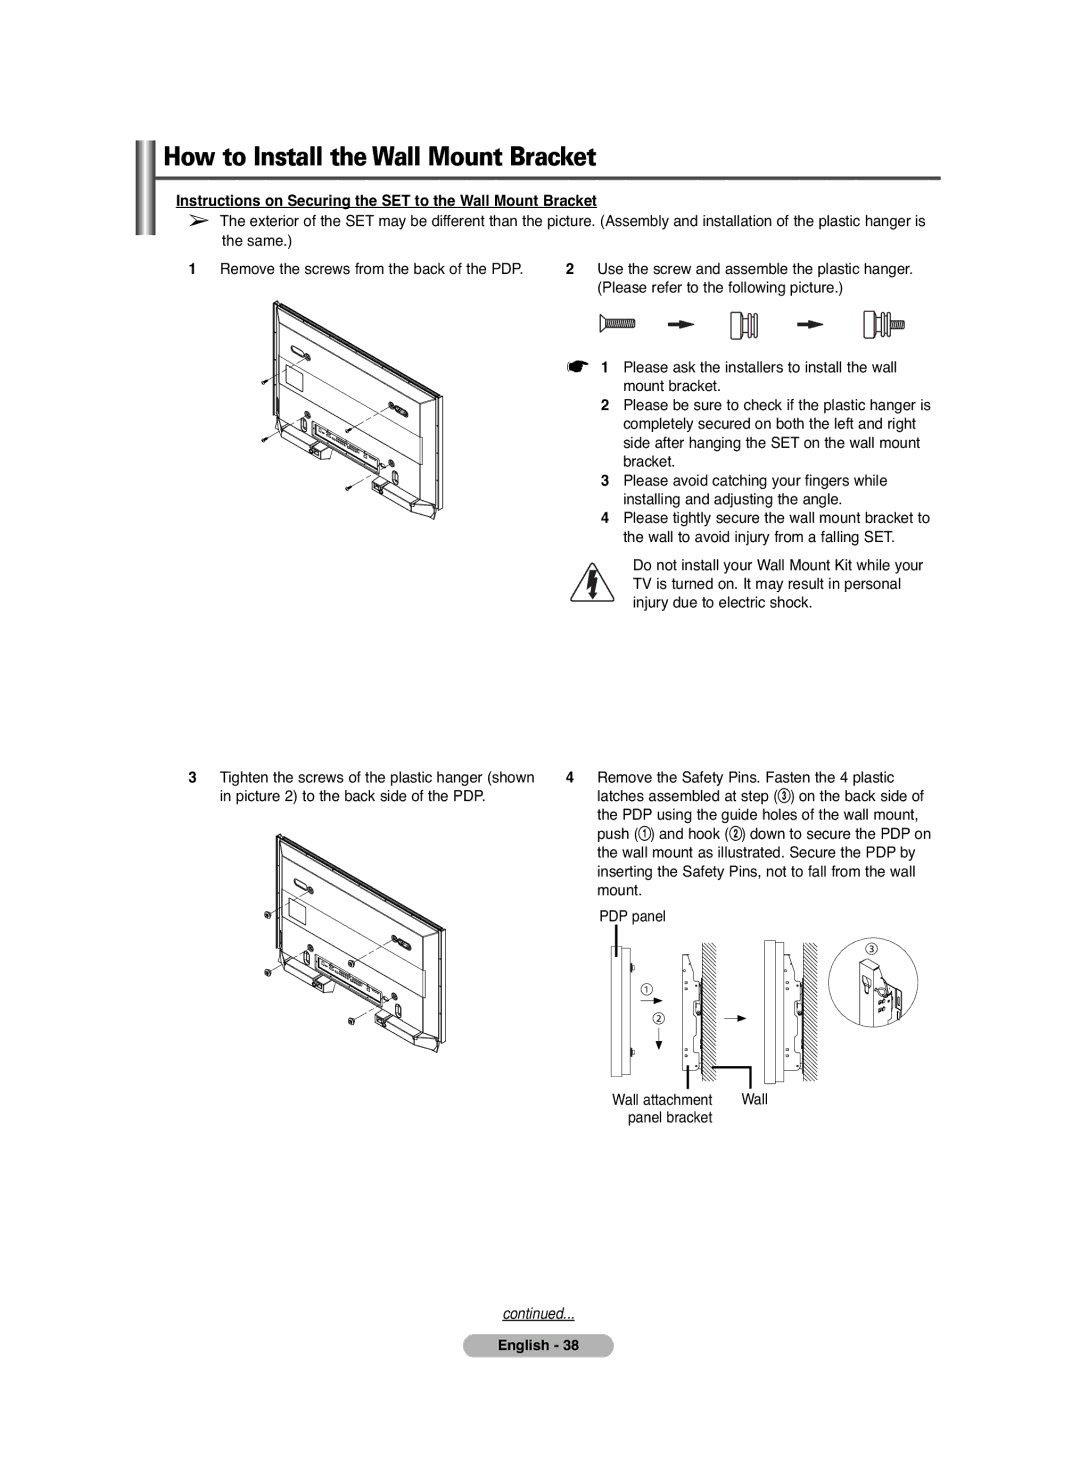 Samsung PS-42C6HD manual Instructions on Securing the SET to the Wall Mount Bracket 